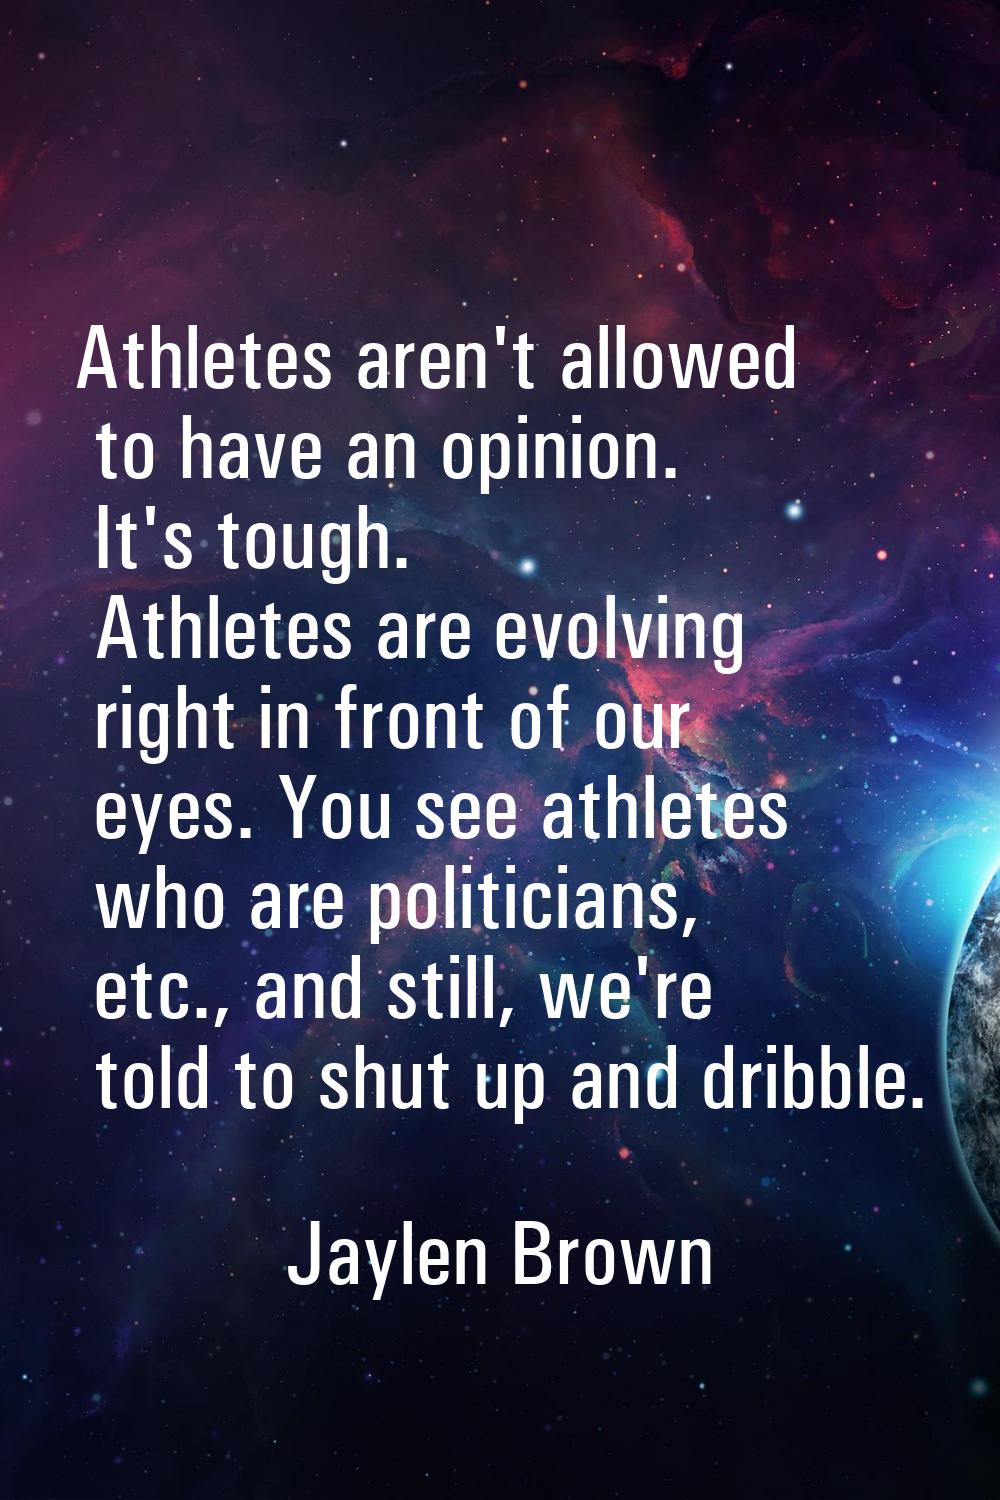 Athletes aren't allowed to have an opinion. It's tough. Athletes are evolving right in front of our